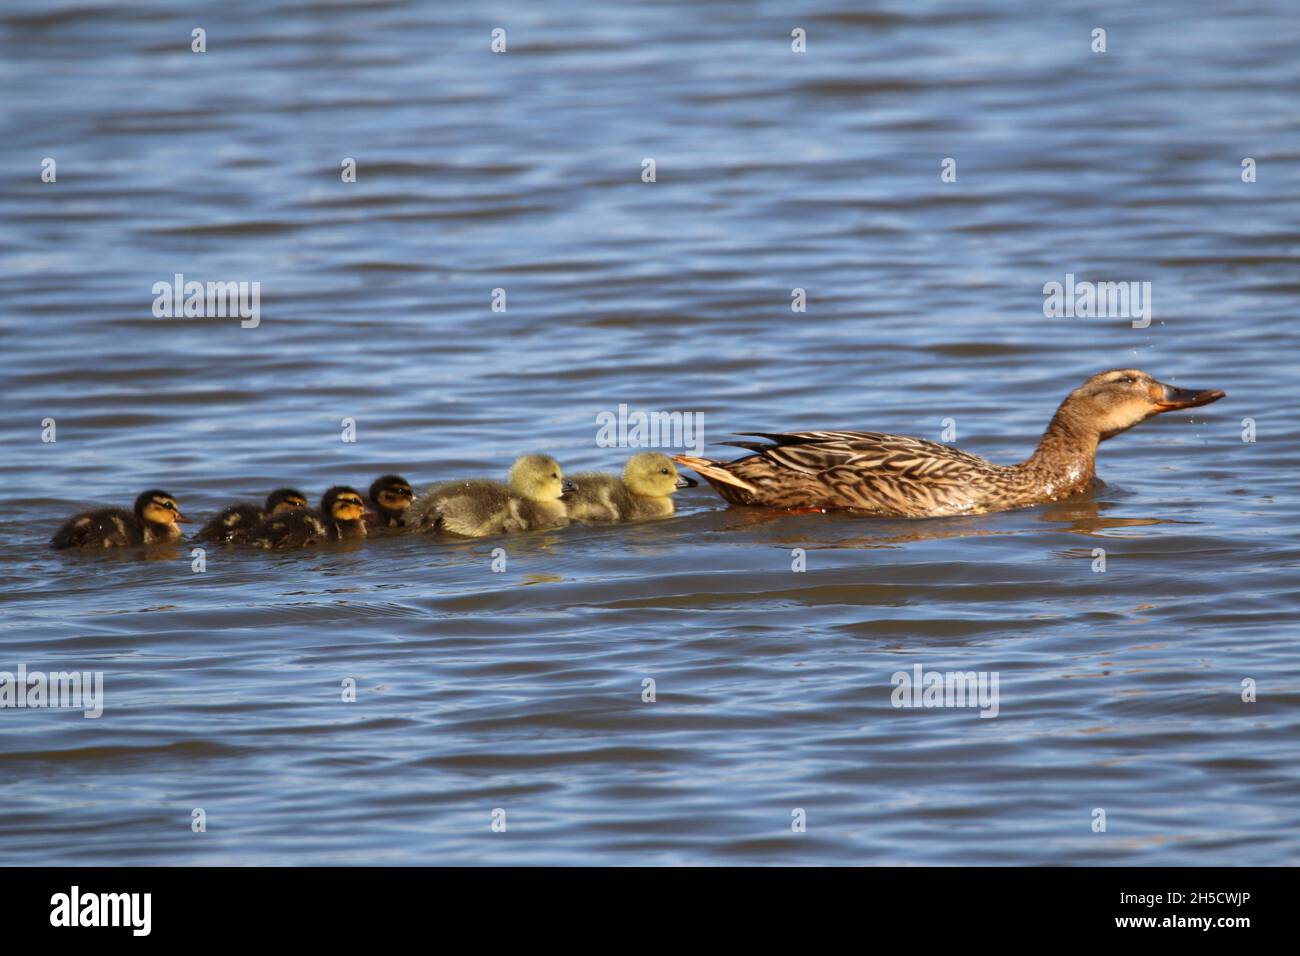 mallard (Anas platyrhynchos), swimming with chicks of different developmental stages, Germany Stock Photo